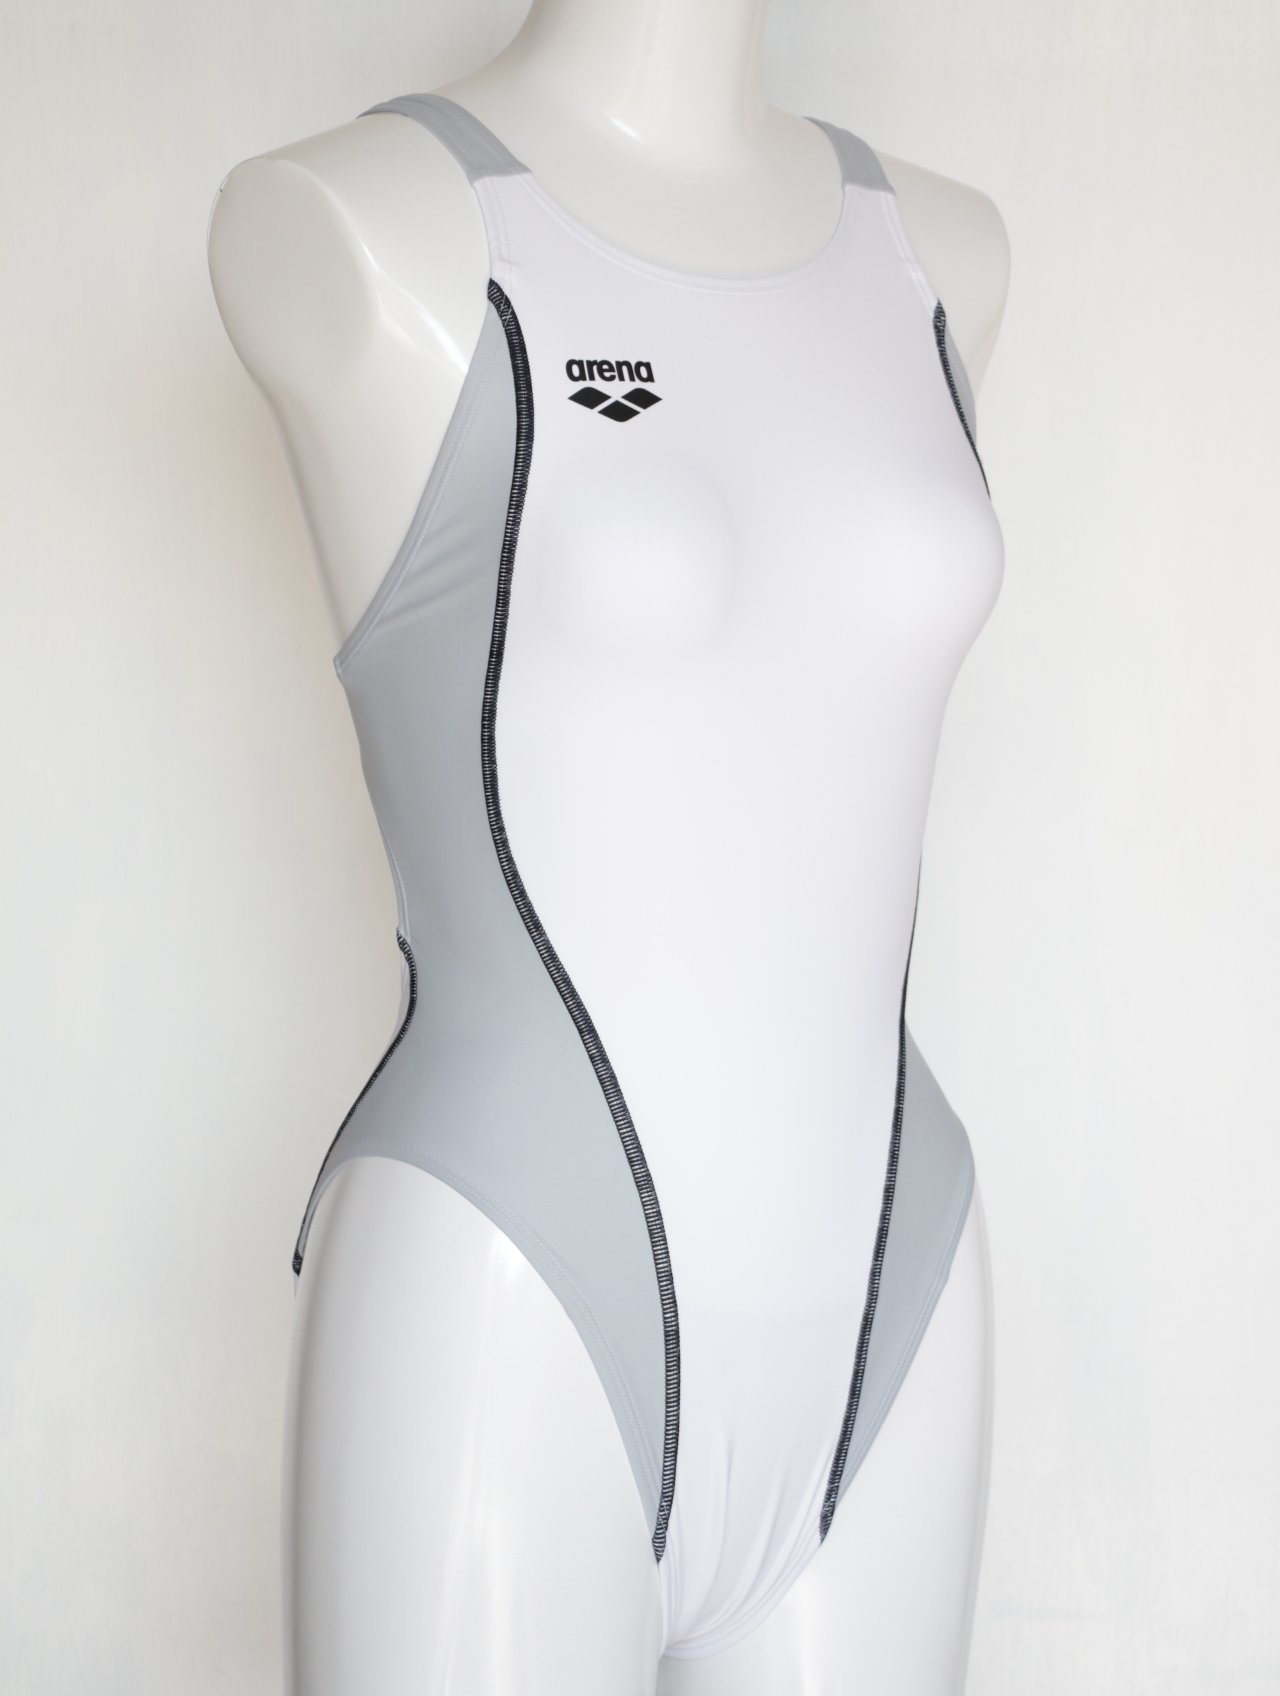 Arena Women's Competition Swimwear Racing Swimsuit nux-D High Leg